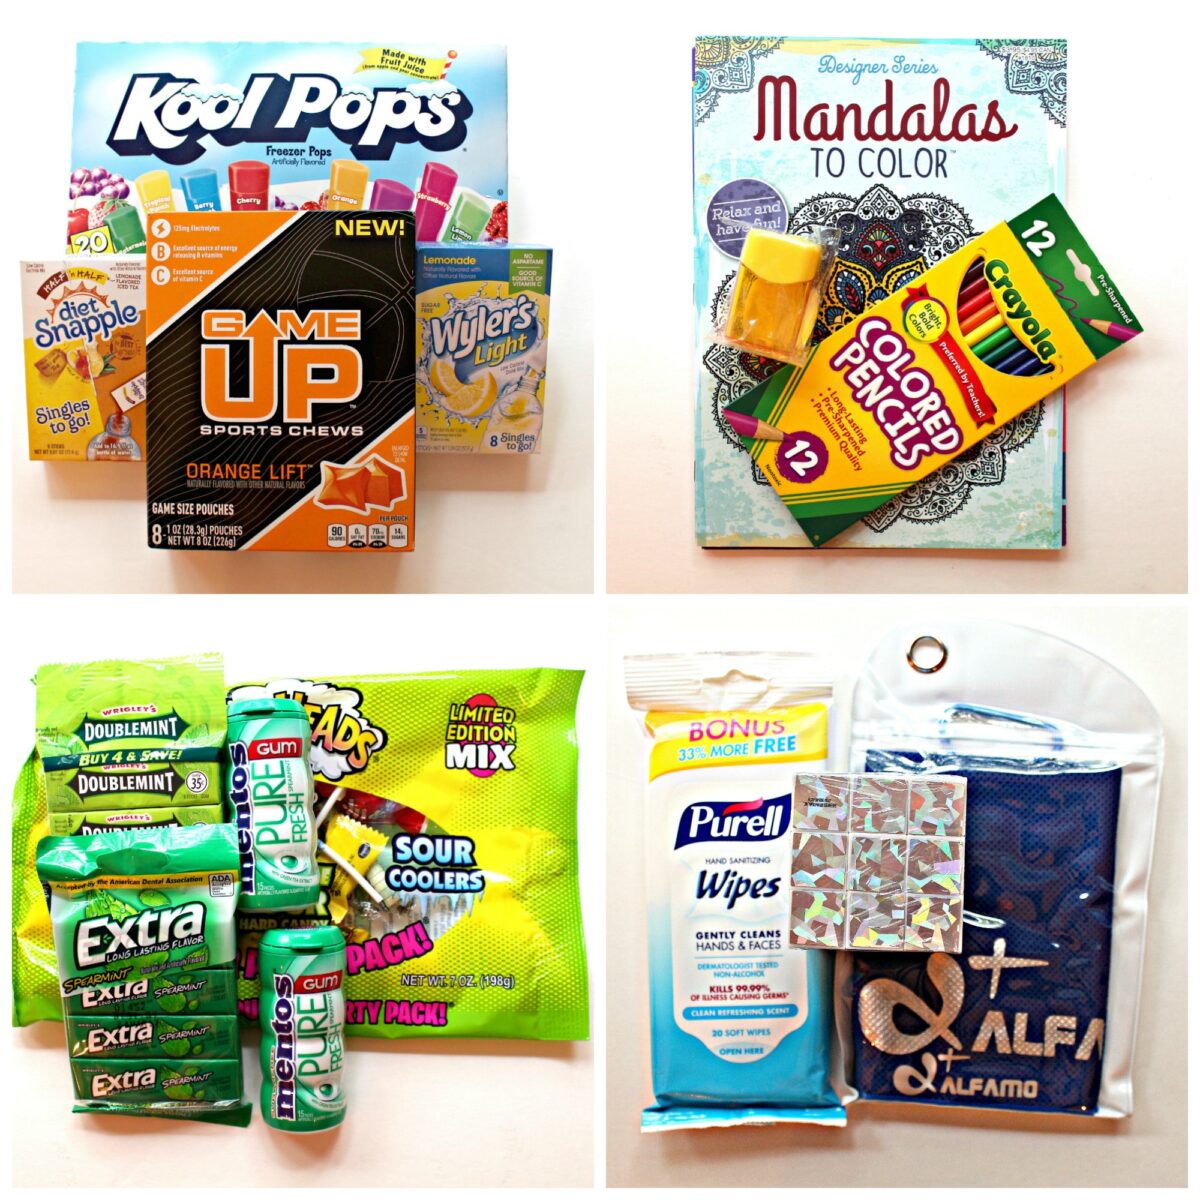 Stay Cool package contents: cooling drinks, coloring tools, cooling candy, wipes and cooling towel.